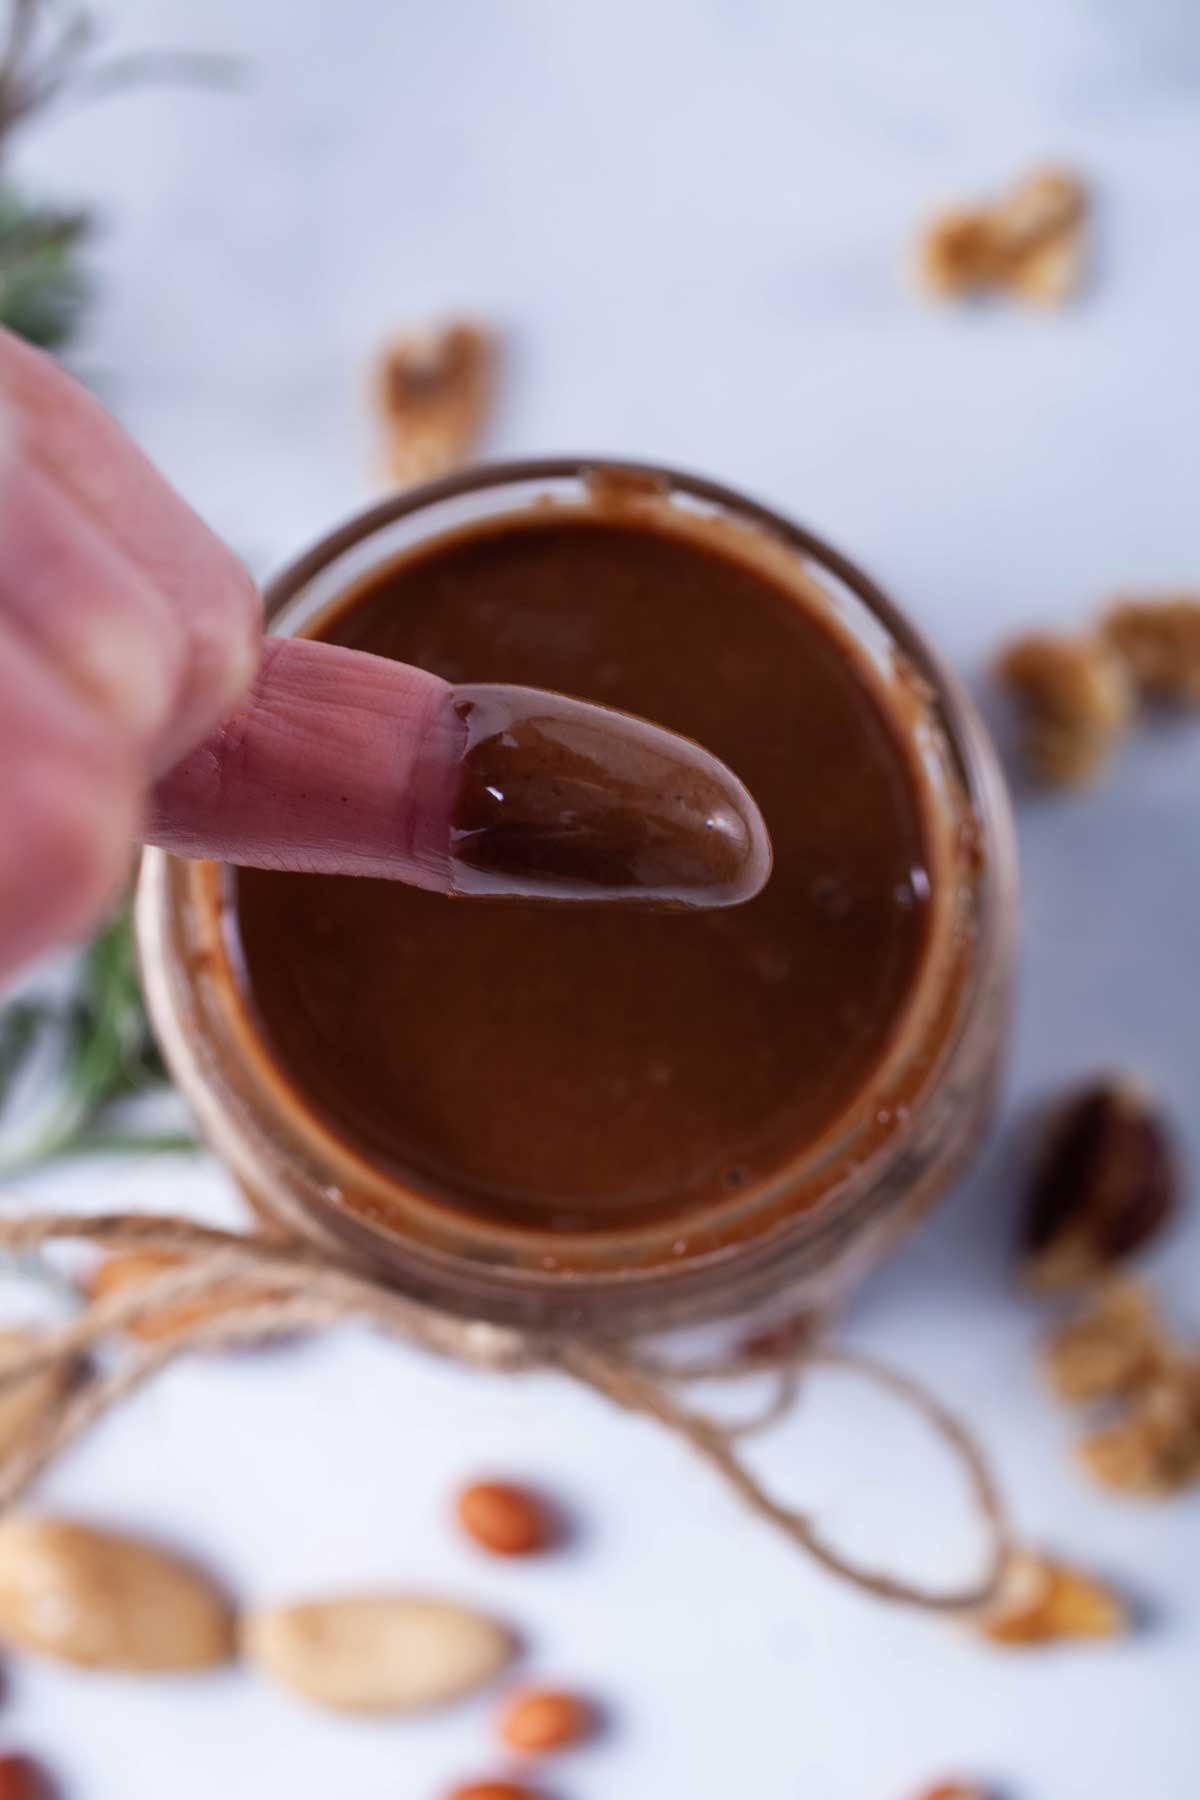 A finger topped with glossy chocolate peanut butter with the nut butter jar in the background.